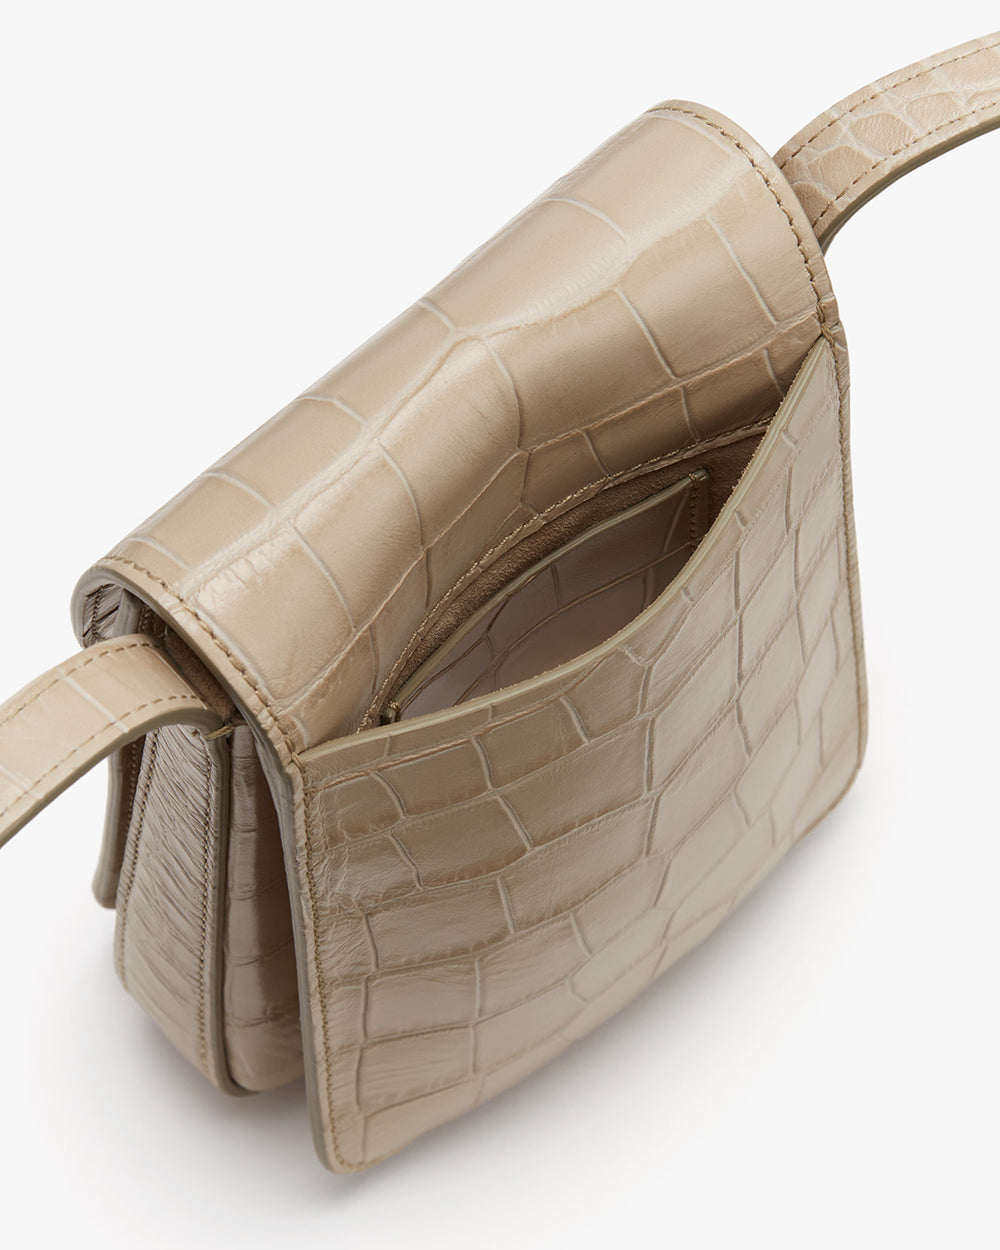 Open handbag with a textured design and a shoulder strap.